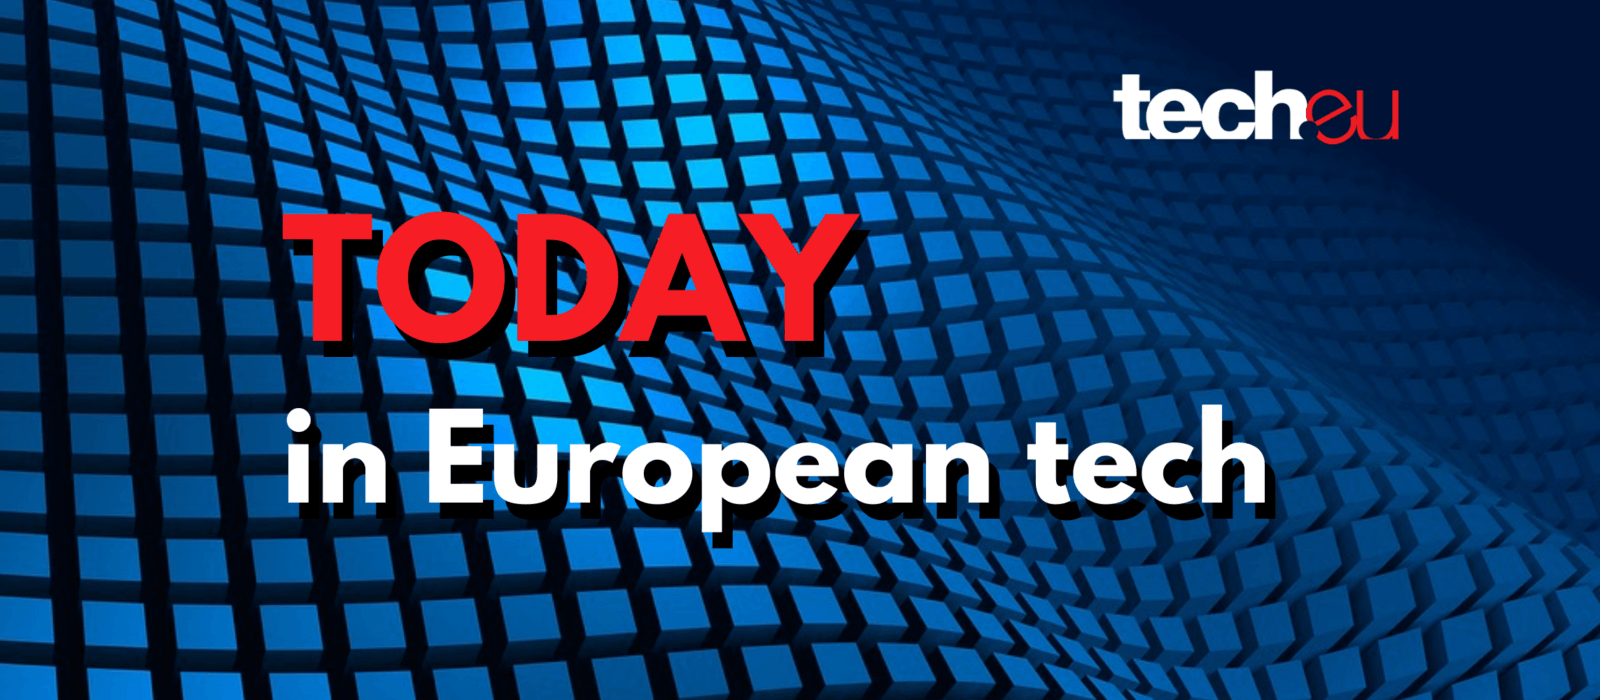 Today in European Tech: France confirms digital tax plans, Russian video streaming platform ivi.ru next in line for a US IPO, and more